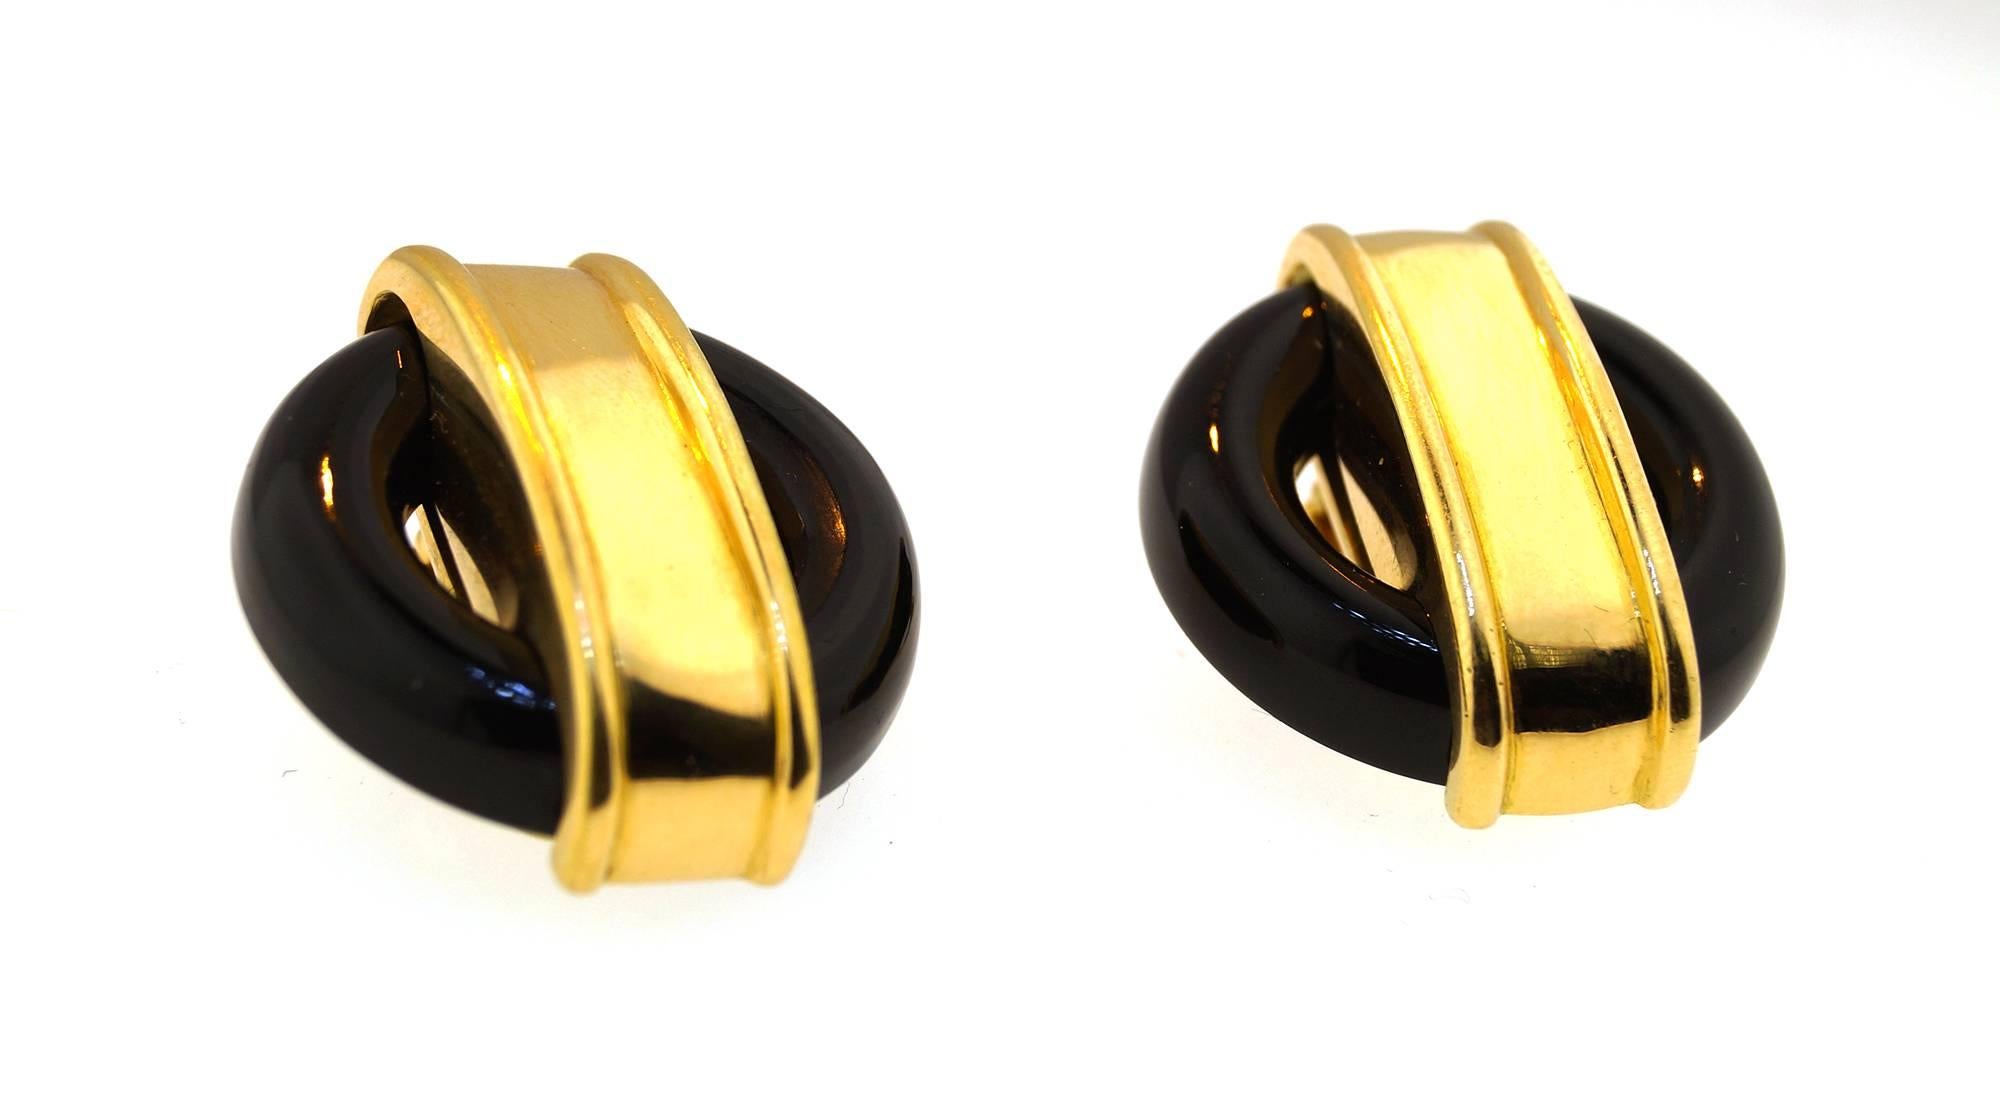 A pair of elegant Cartier earrings designed by the remarkable Italian designer Aldo Cipullo in 1973, presenting onyx on a beautiful 18K yellow gold mounting. Creatively designed, these earrings are the perfect piece to complement a collection. 